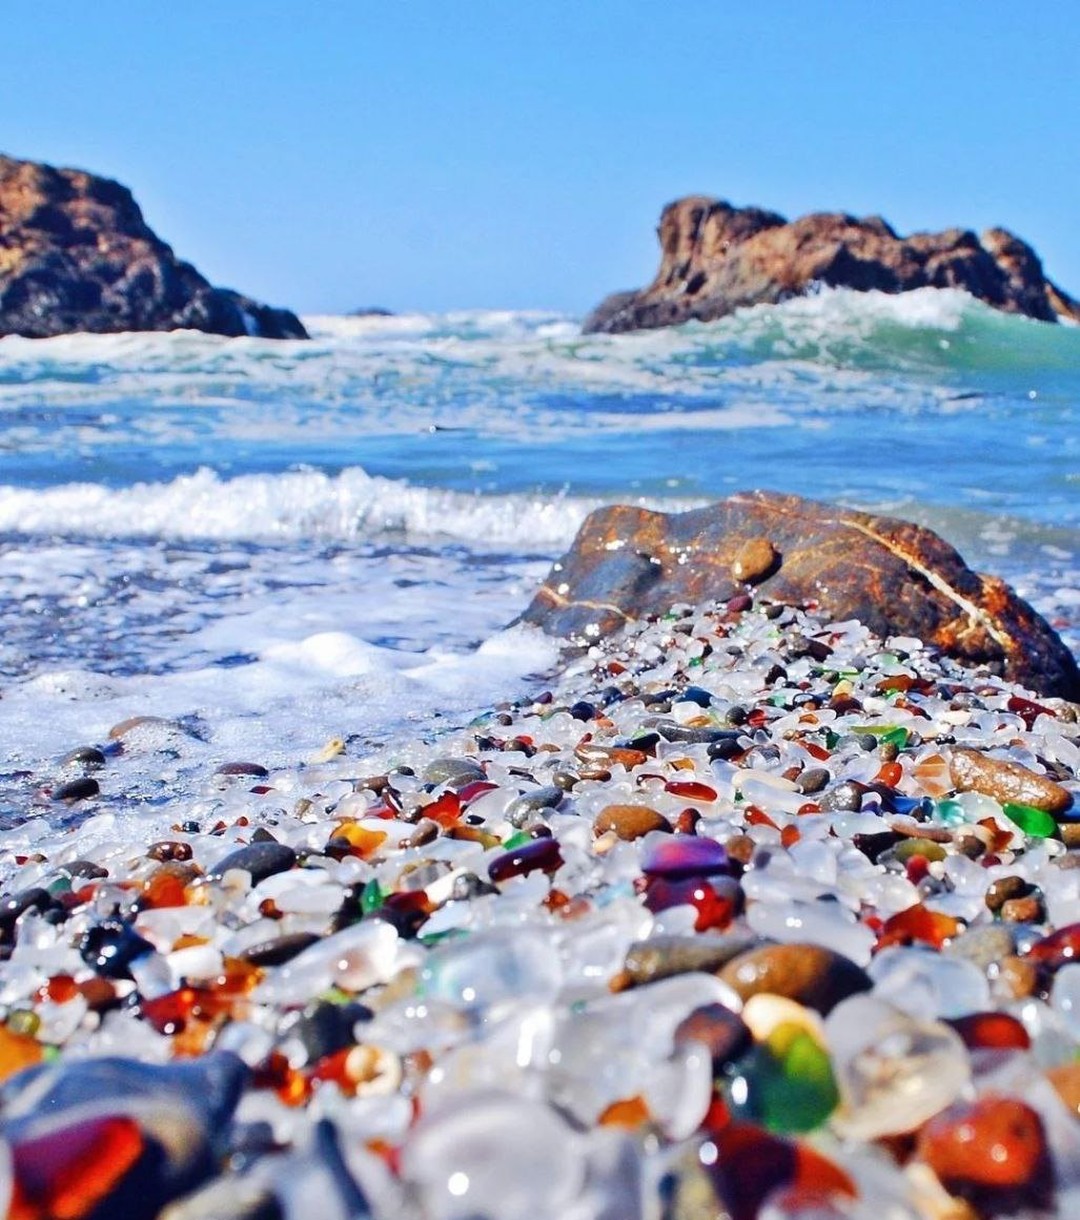 California Sea Glass Beaches: Where to Find The Best